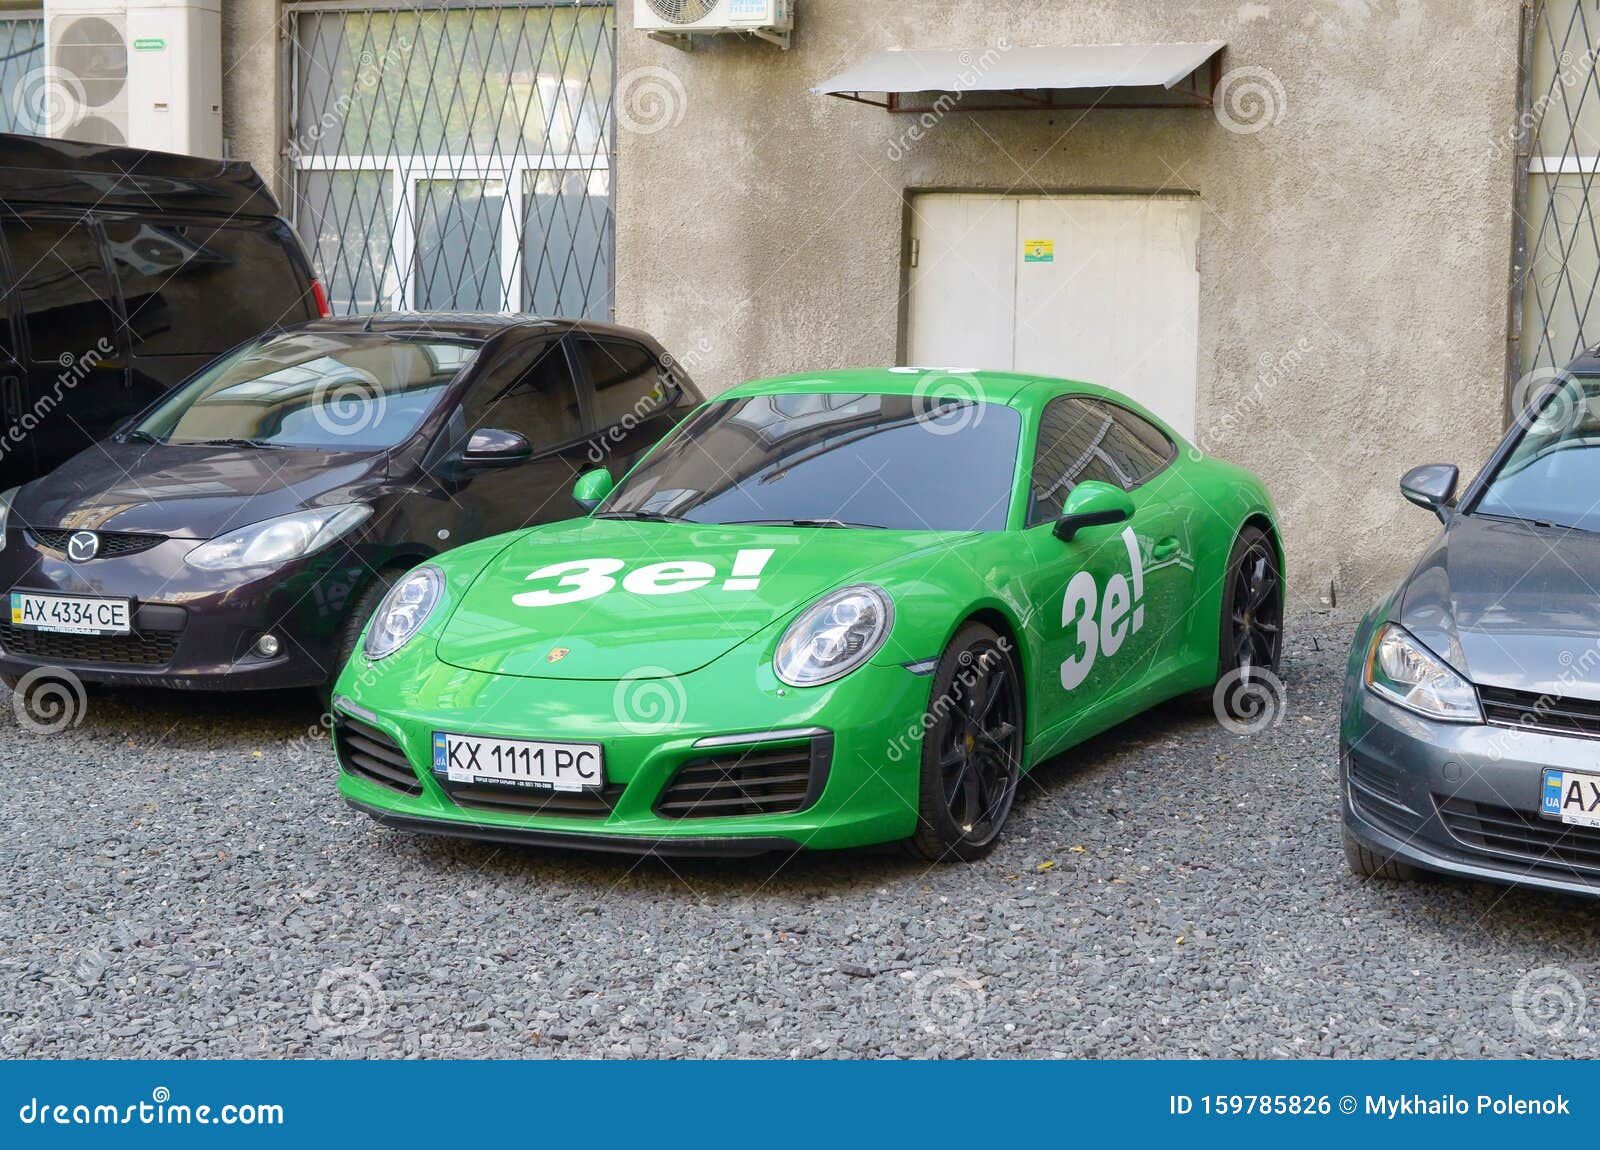 Porsche 911 Carrera 4S in Green Color with White Stickers of Ze Team  Editorial Photo - Image of front, dealer: 159785826